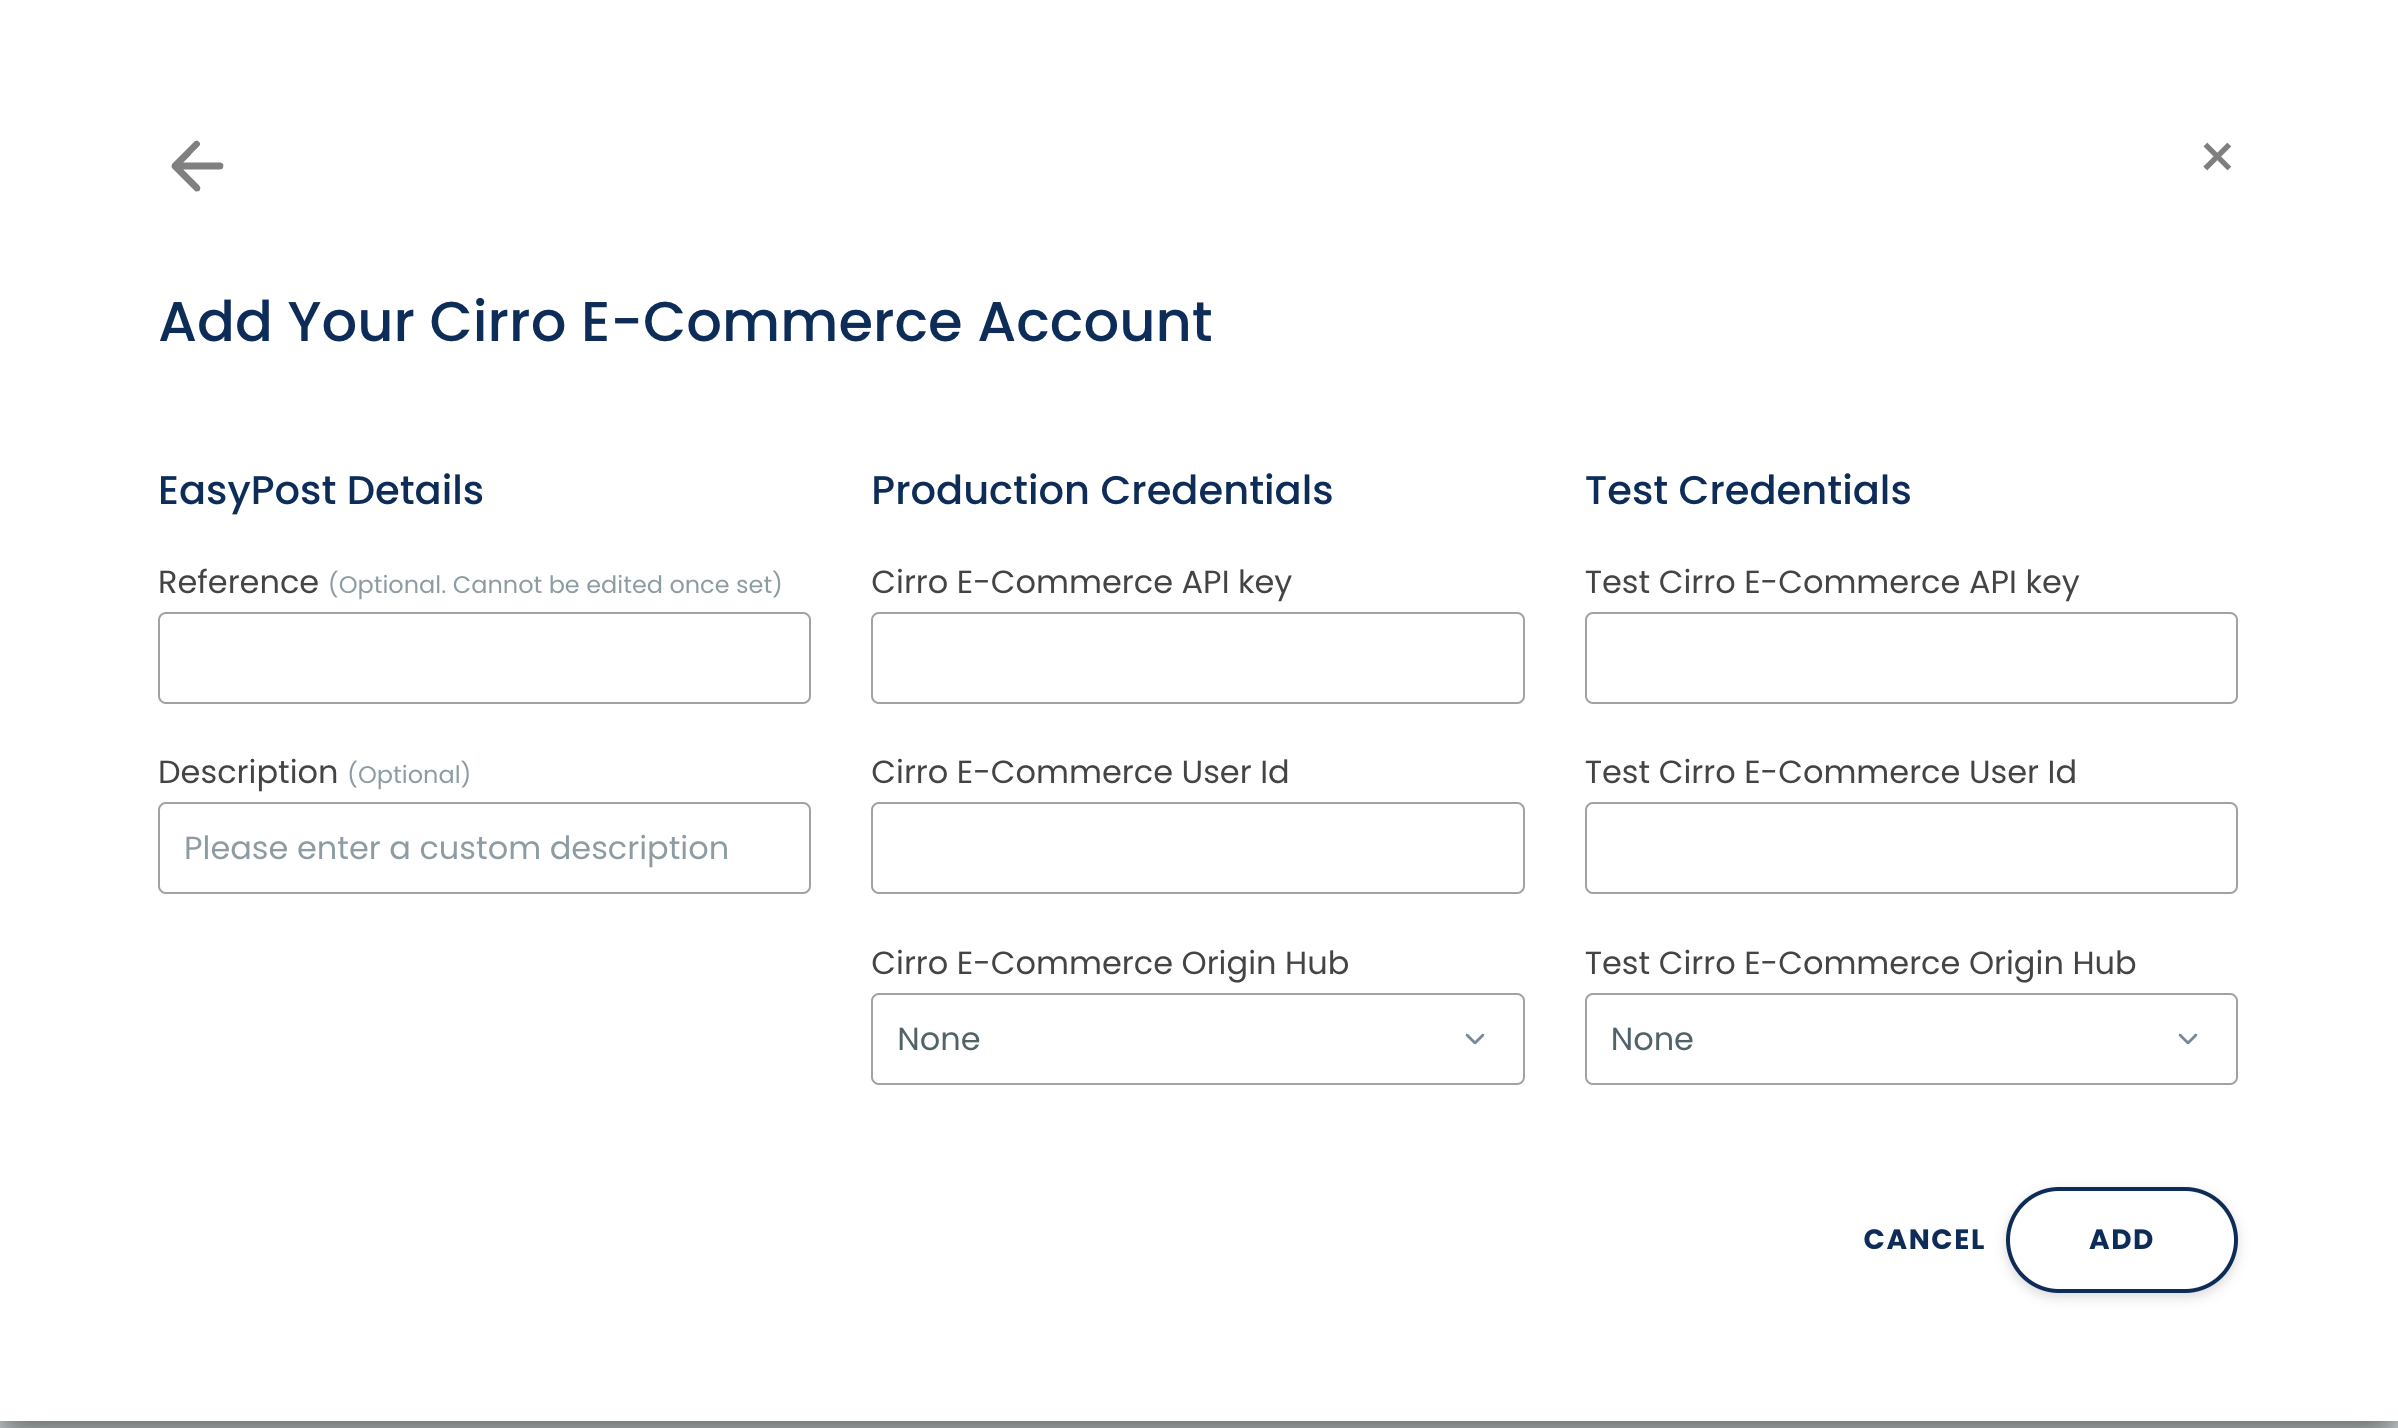 Screenshot of EasyPost dashboard form to add your Cirro E-Commerce account